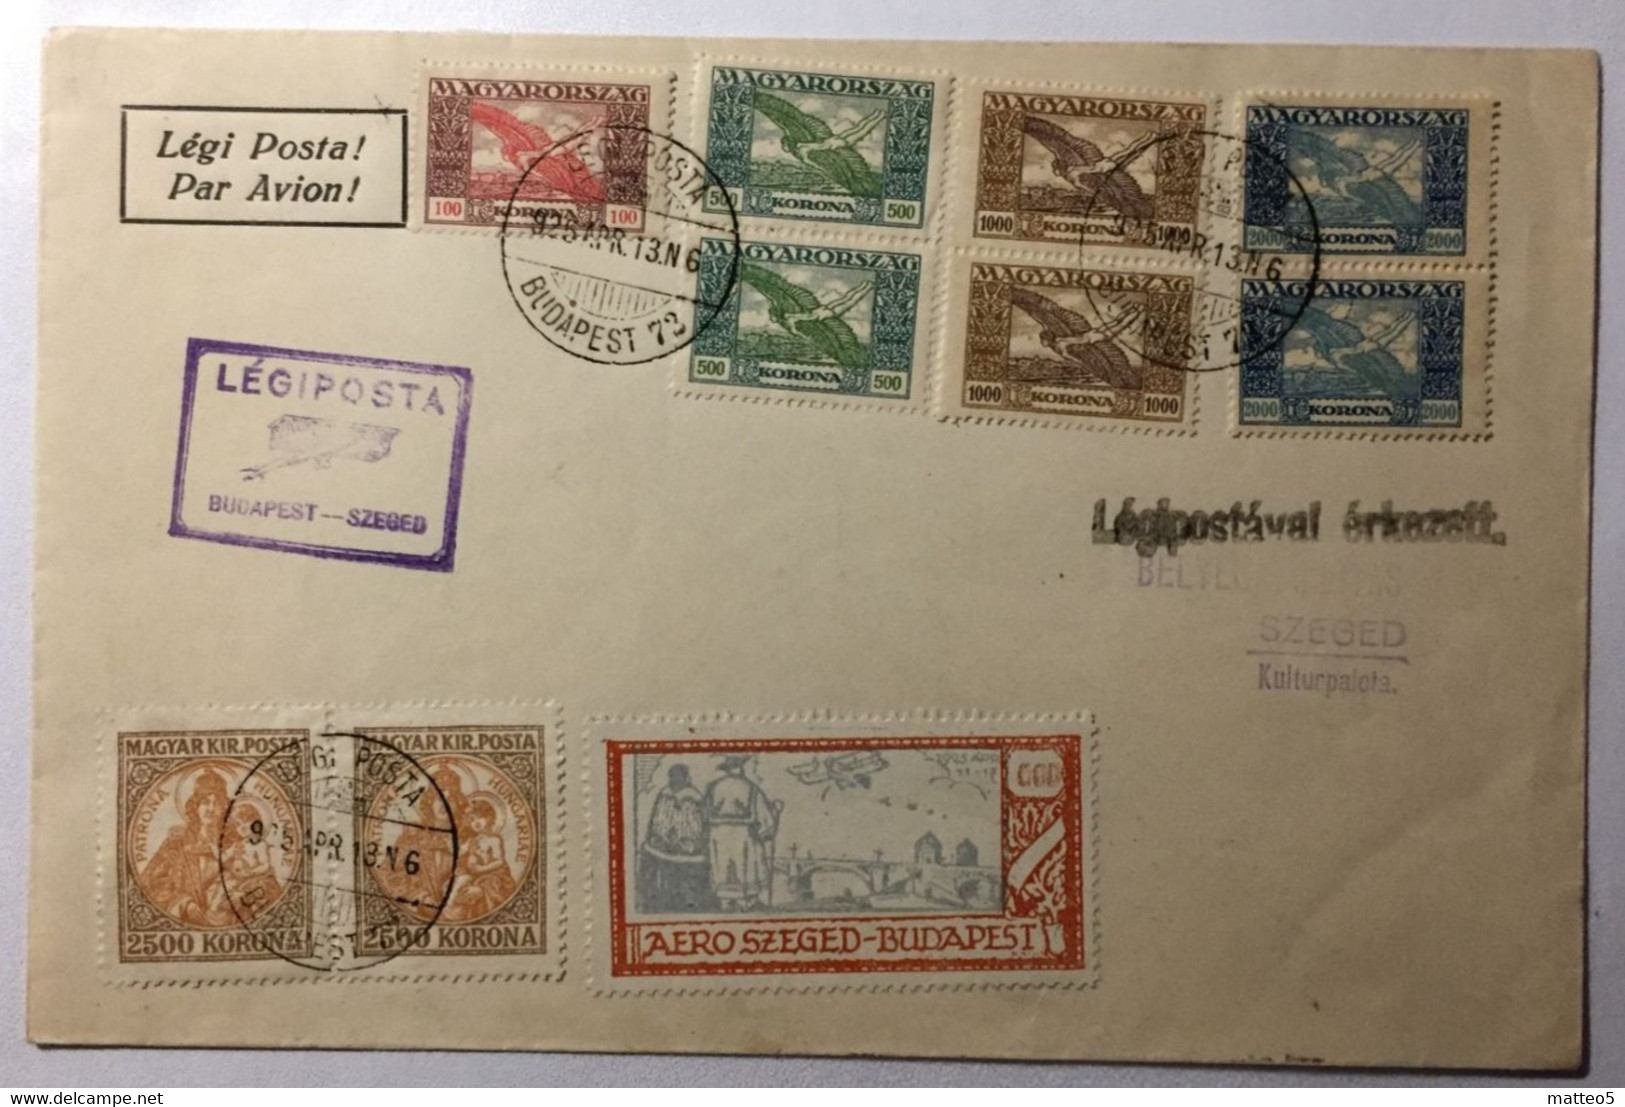 1925 - Hungary Magyar - Traveled Mai - Legi Posta From Budapest To Szeged - 701 - Poststempel (Marcophilie)